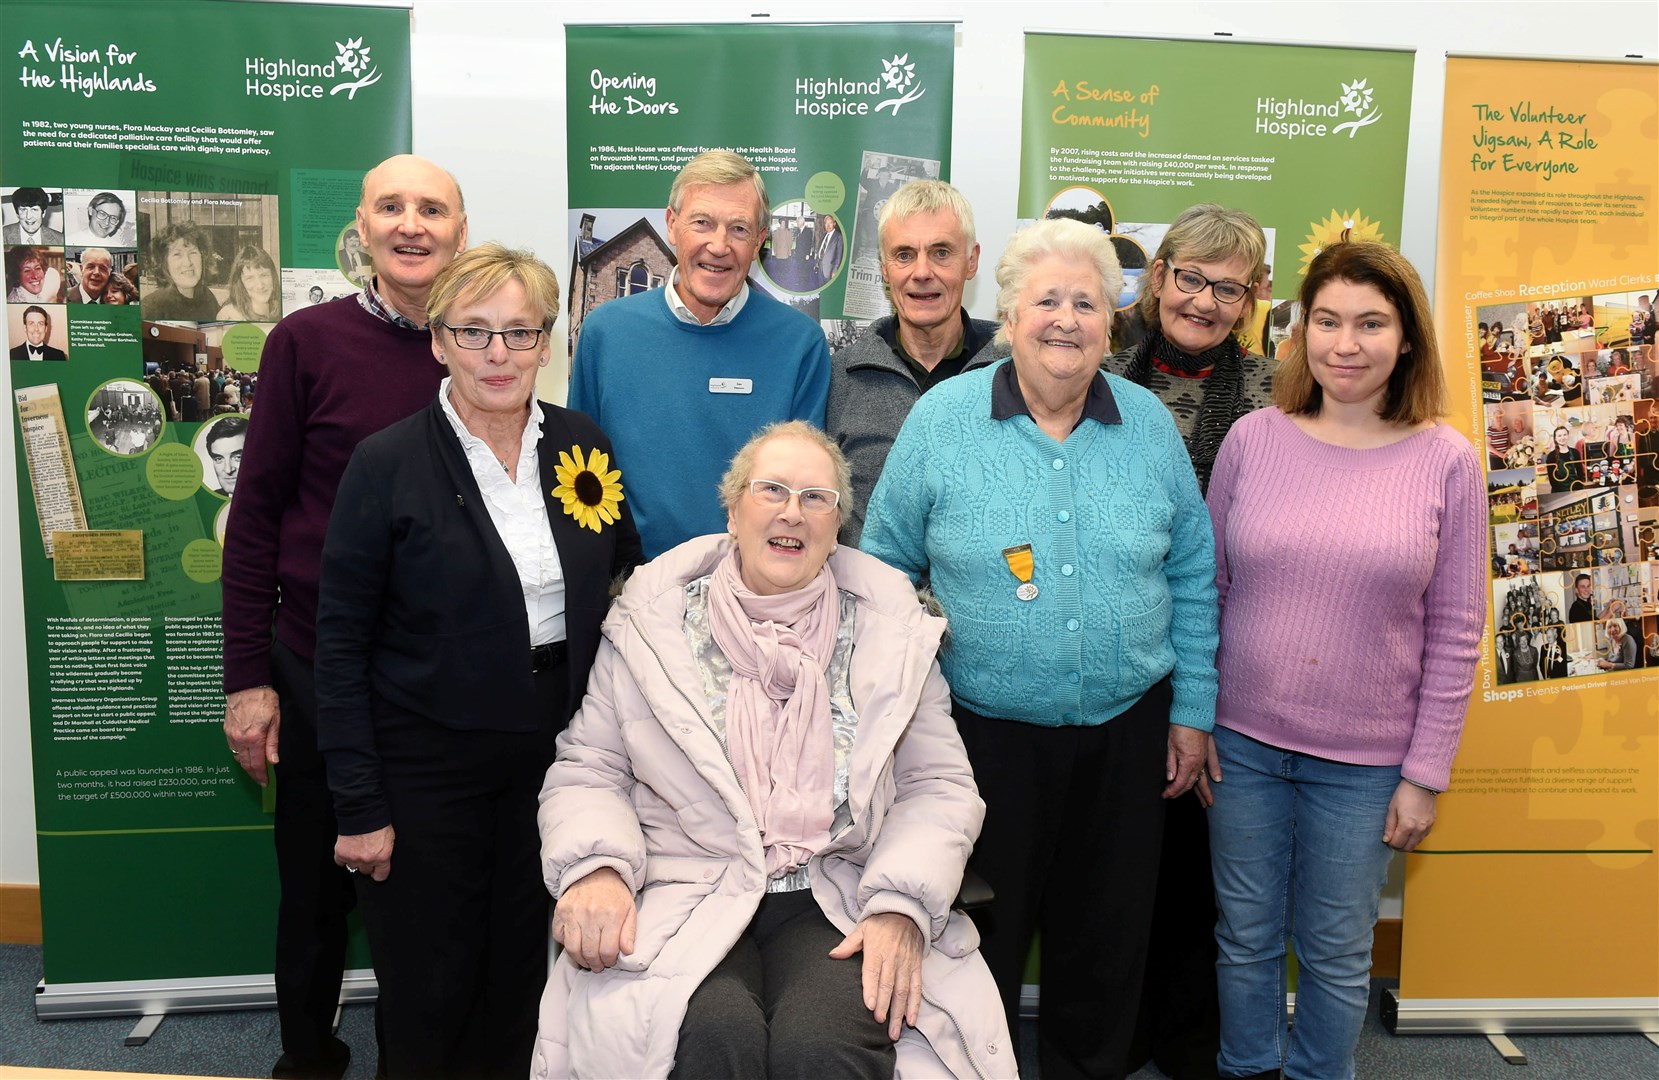 Some of the volunteers who helped with the project: Colin Waller, Rosemary Rankin, Iain Smith, Cecilia Bottomley, Eric Butlins, Kathleen Sim, Linda Macdonald and Esther Mackinnon.